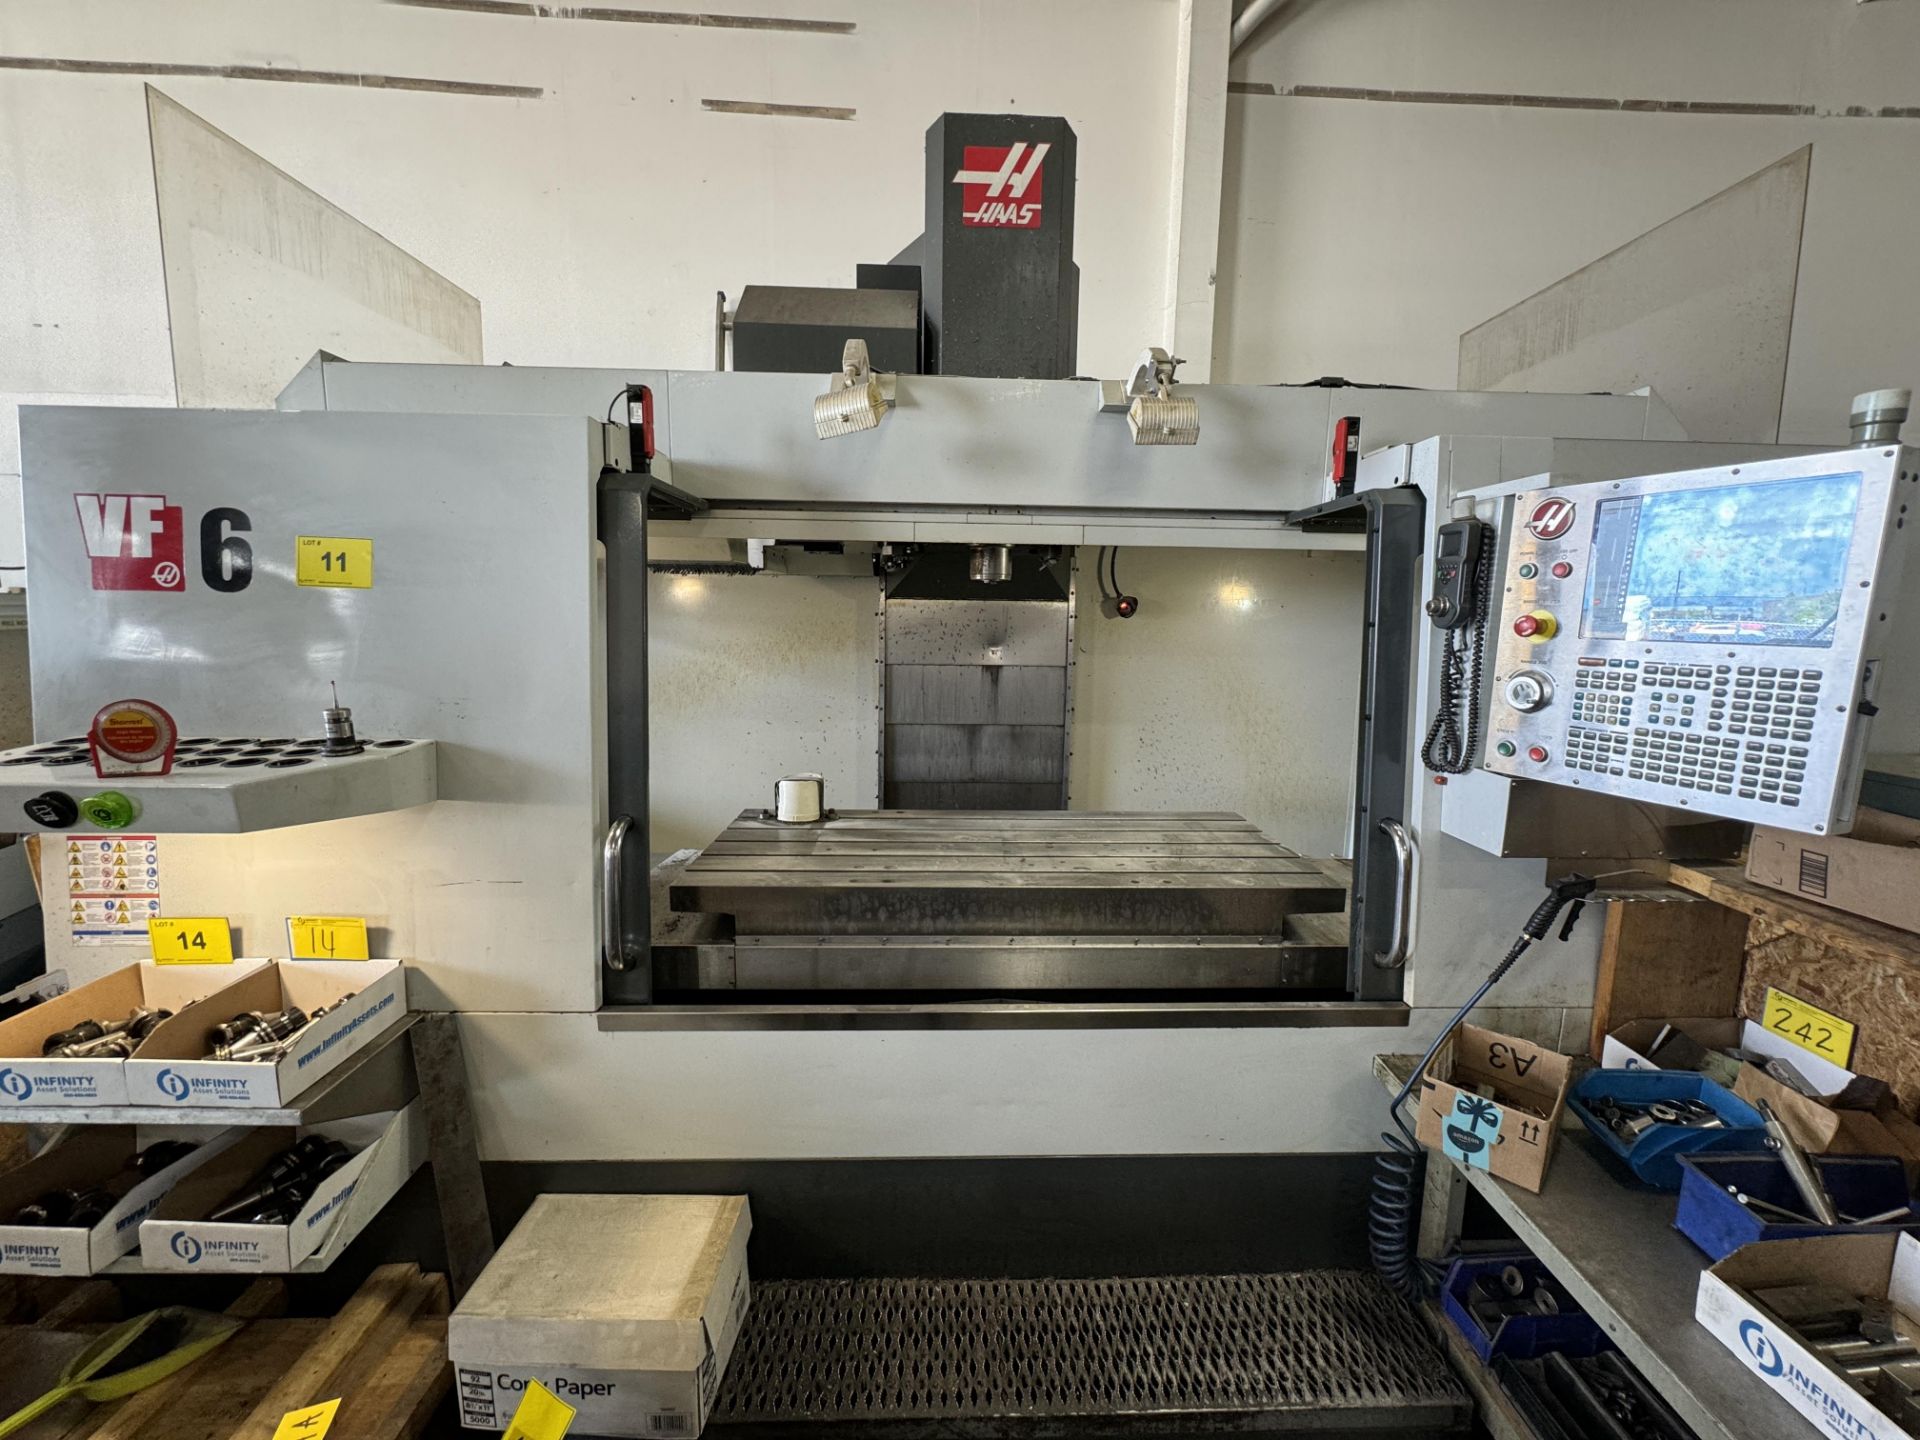 2012 HAAS VF6/40 CNC VERTICAL MACHINING CENTER, CNC CONTROL, 24” X 60” TABLE, 40 TAPER, 10,000 RPM - Image 22 of 25